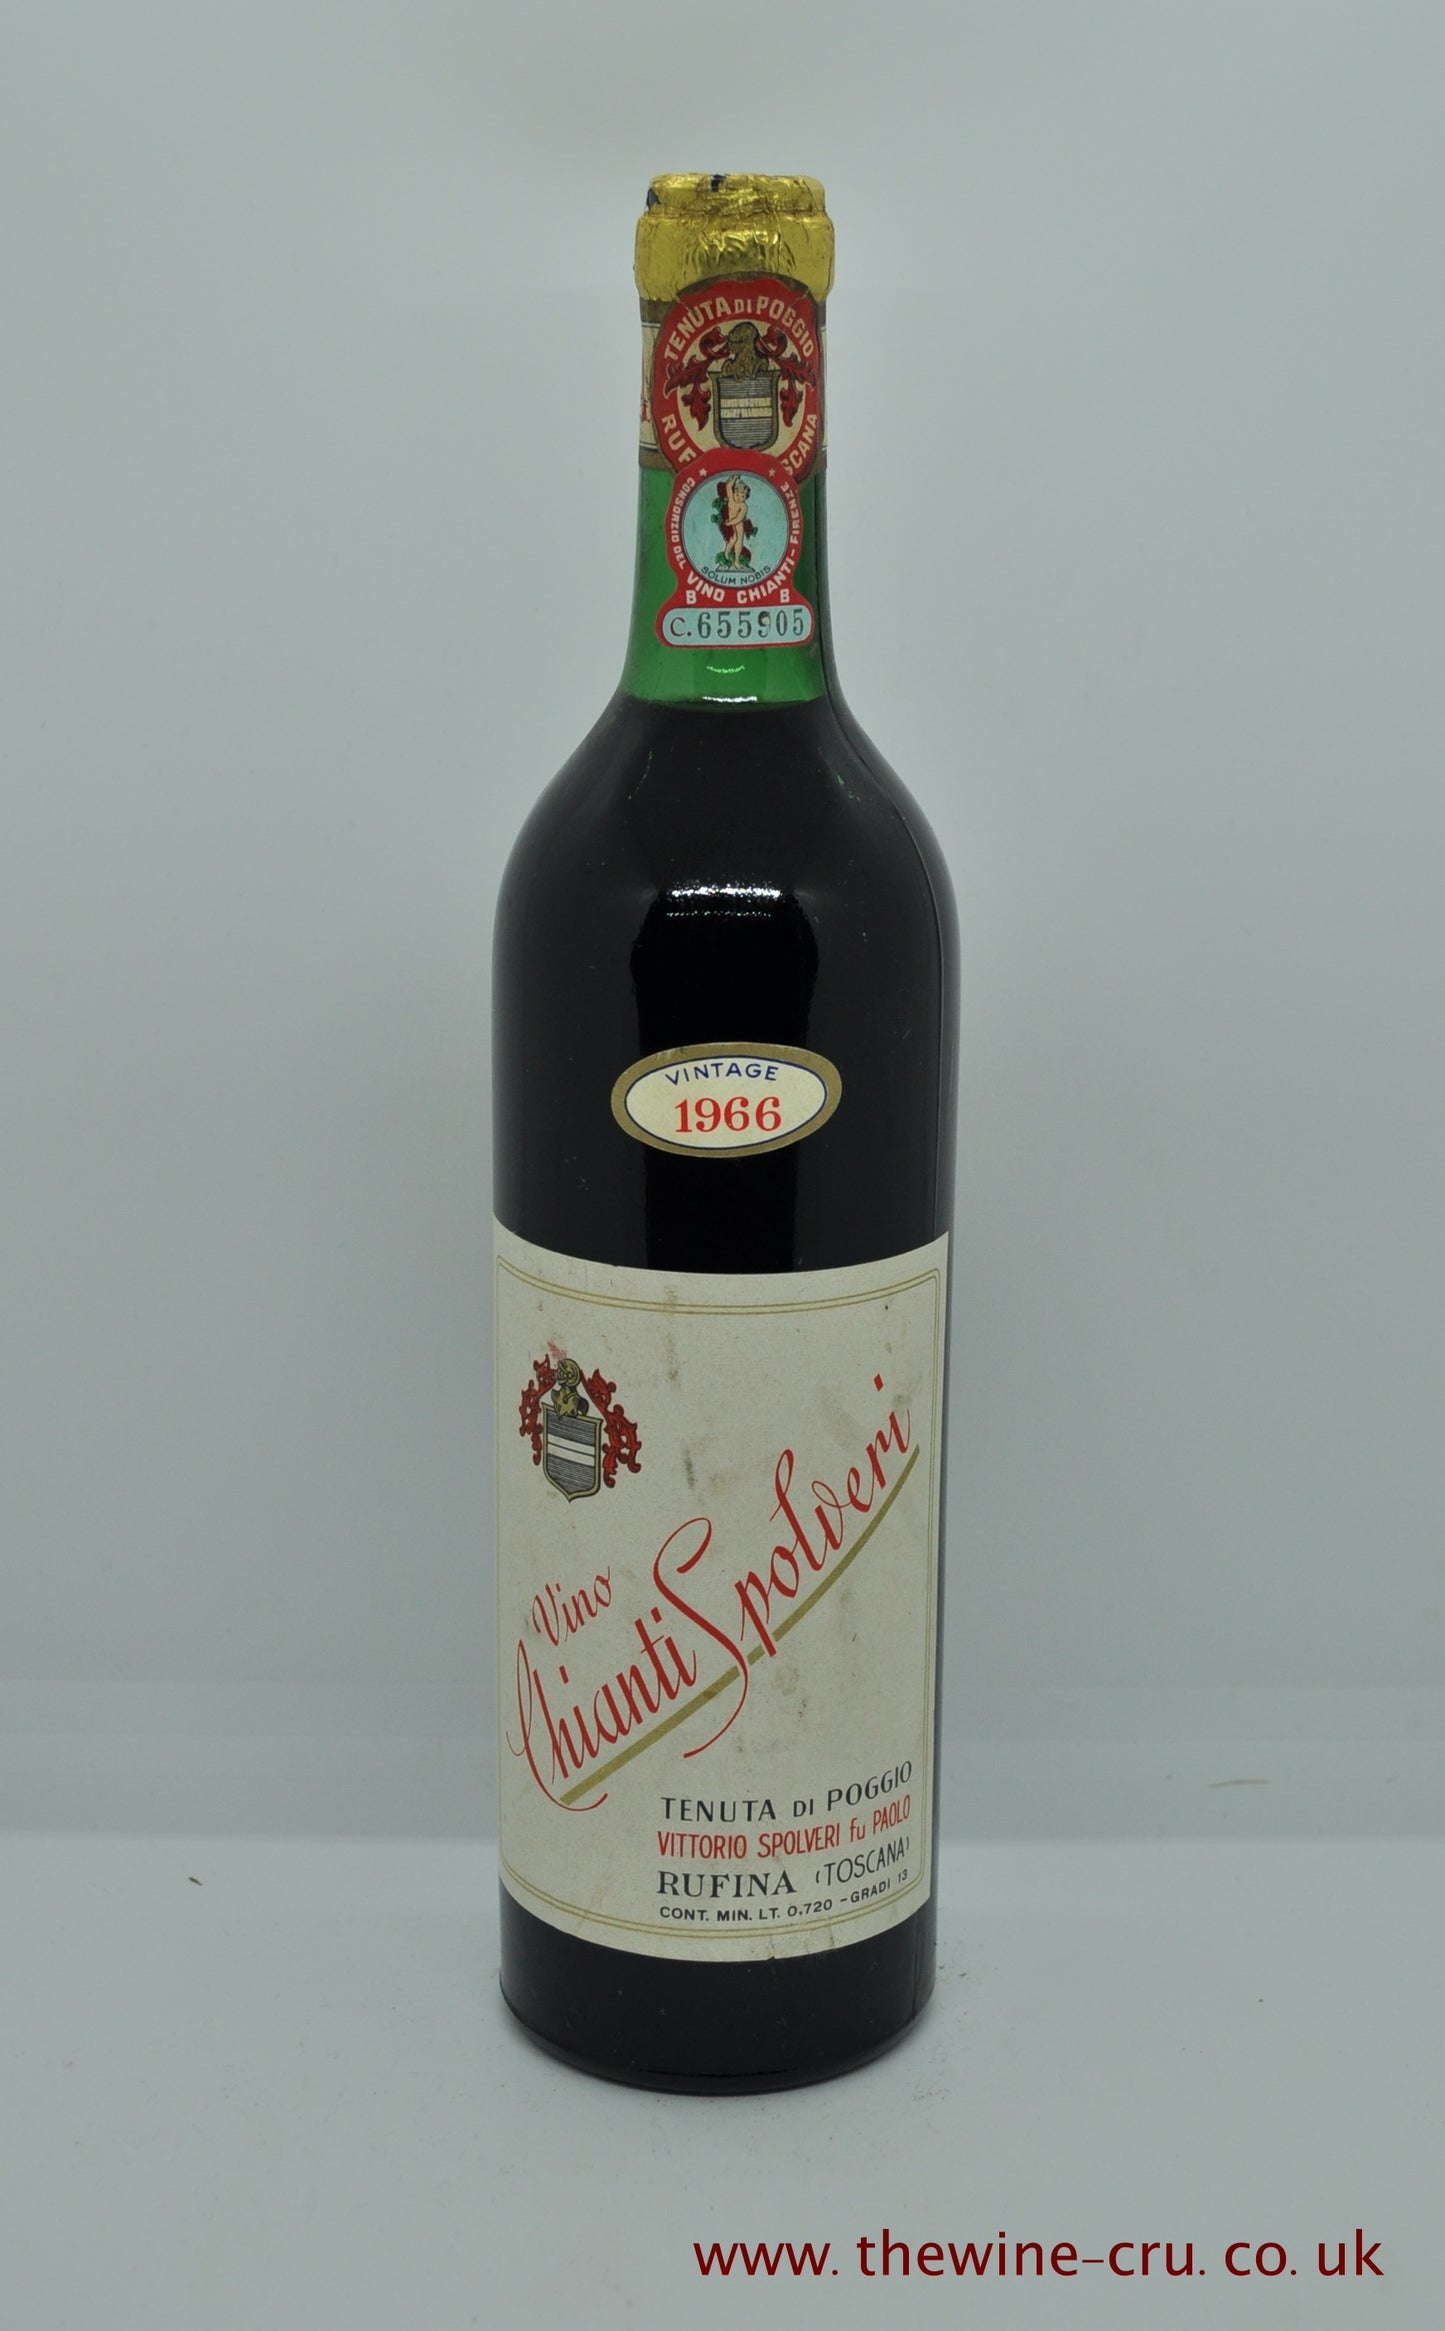 A bottle of 1966 vintage red wine. Chianti Spolieri Italy. The bottle is in good condition with the wine level being very top shoulder. Immediate delivery. Free local delivery. Gift wrapping available.